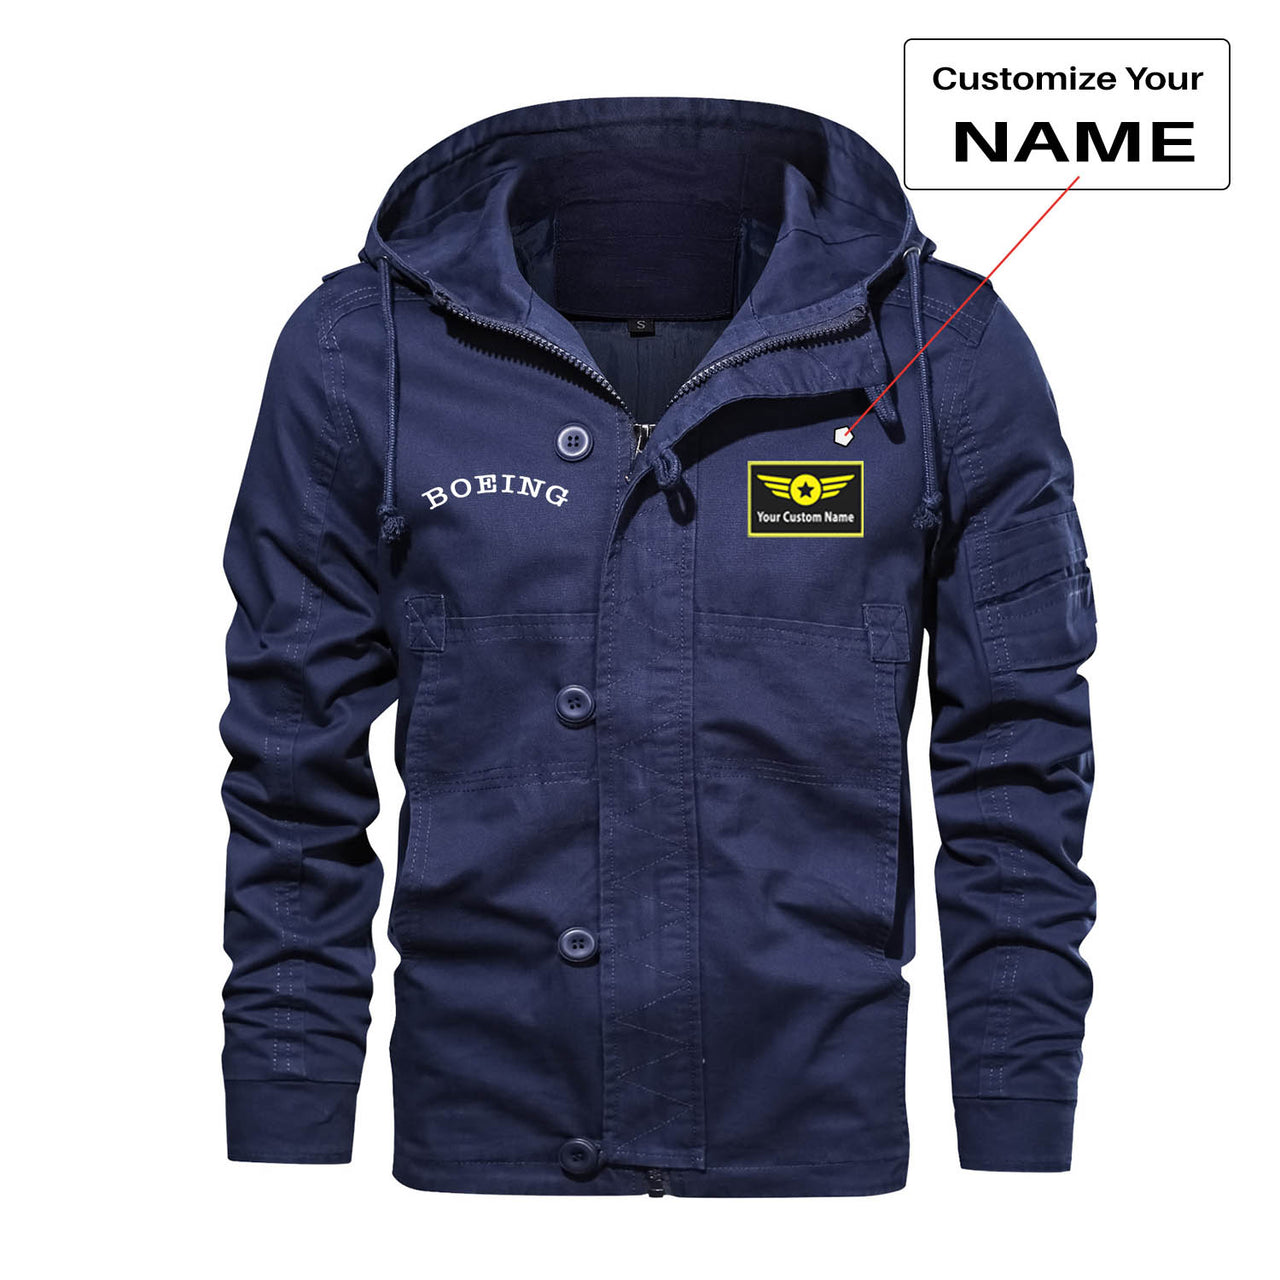 Special BOEING Text Designed Cotton Jackets